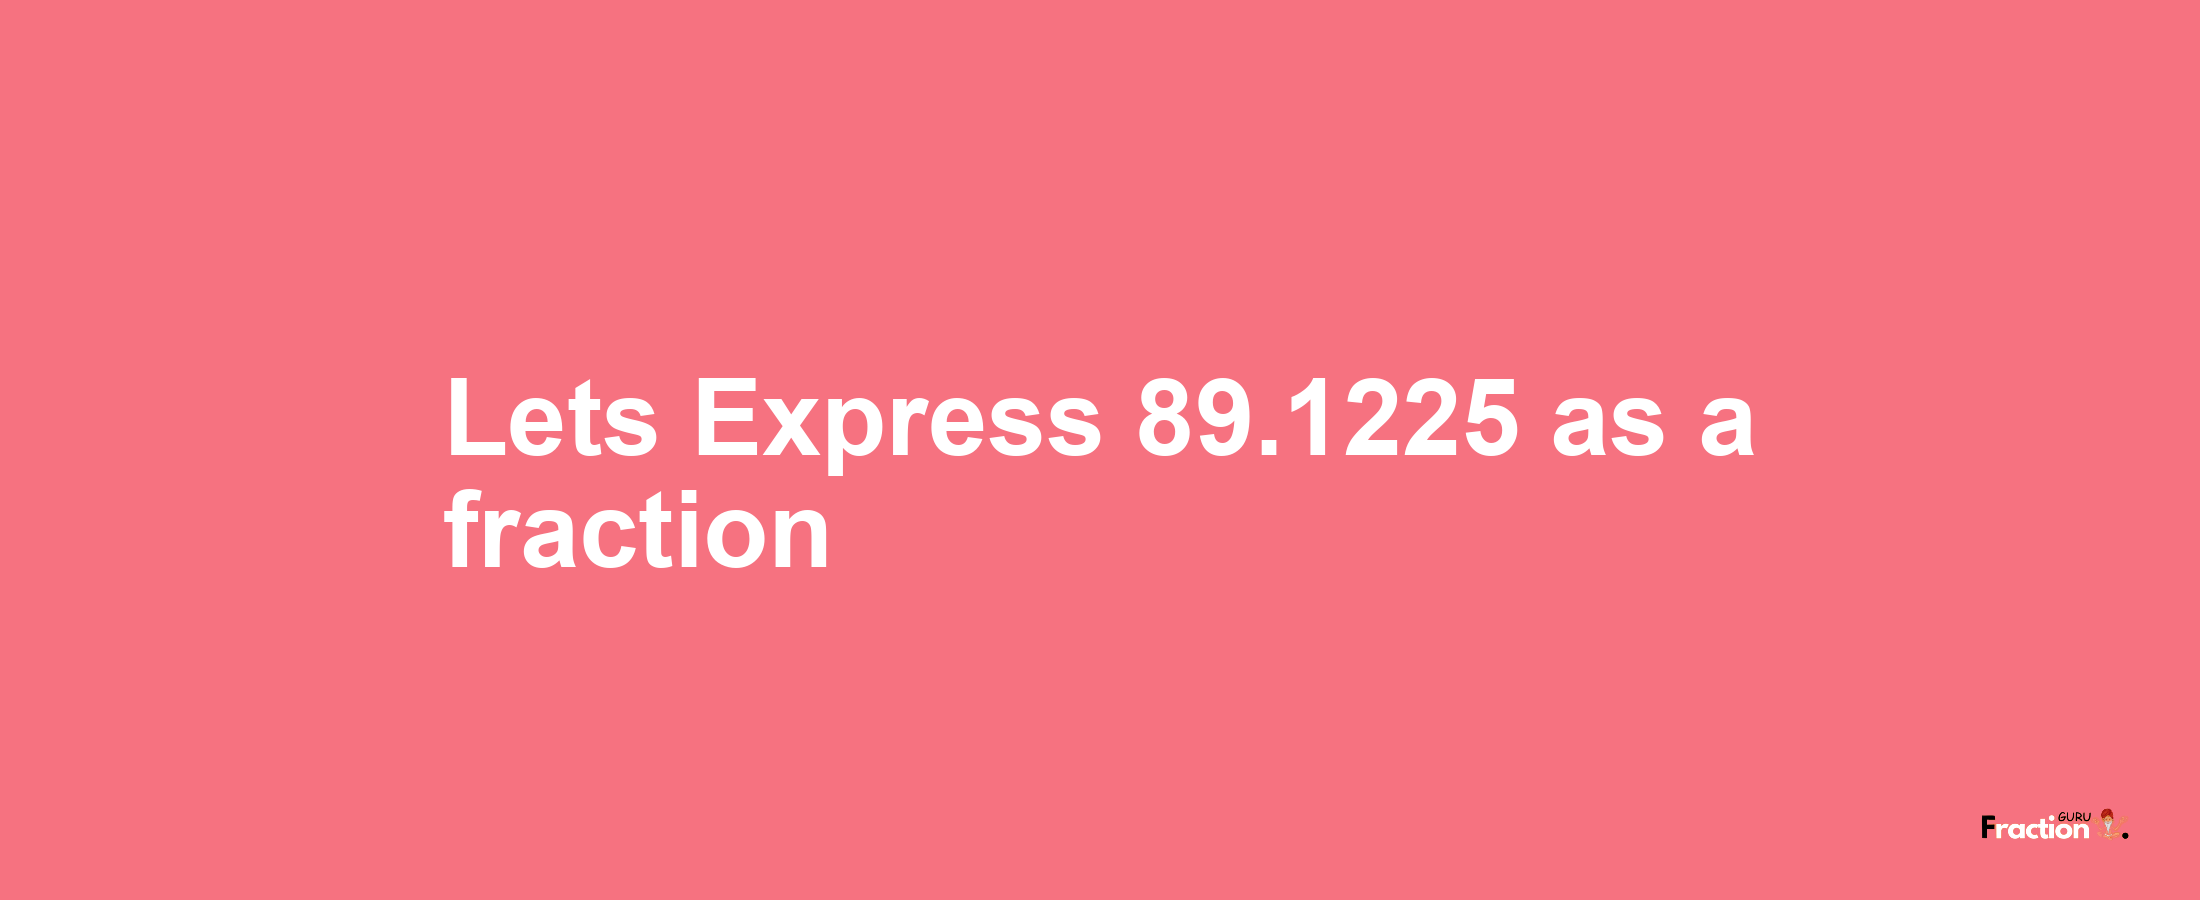 Lets Express 89.1225 as afraction